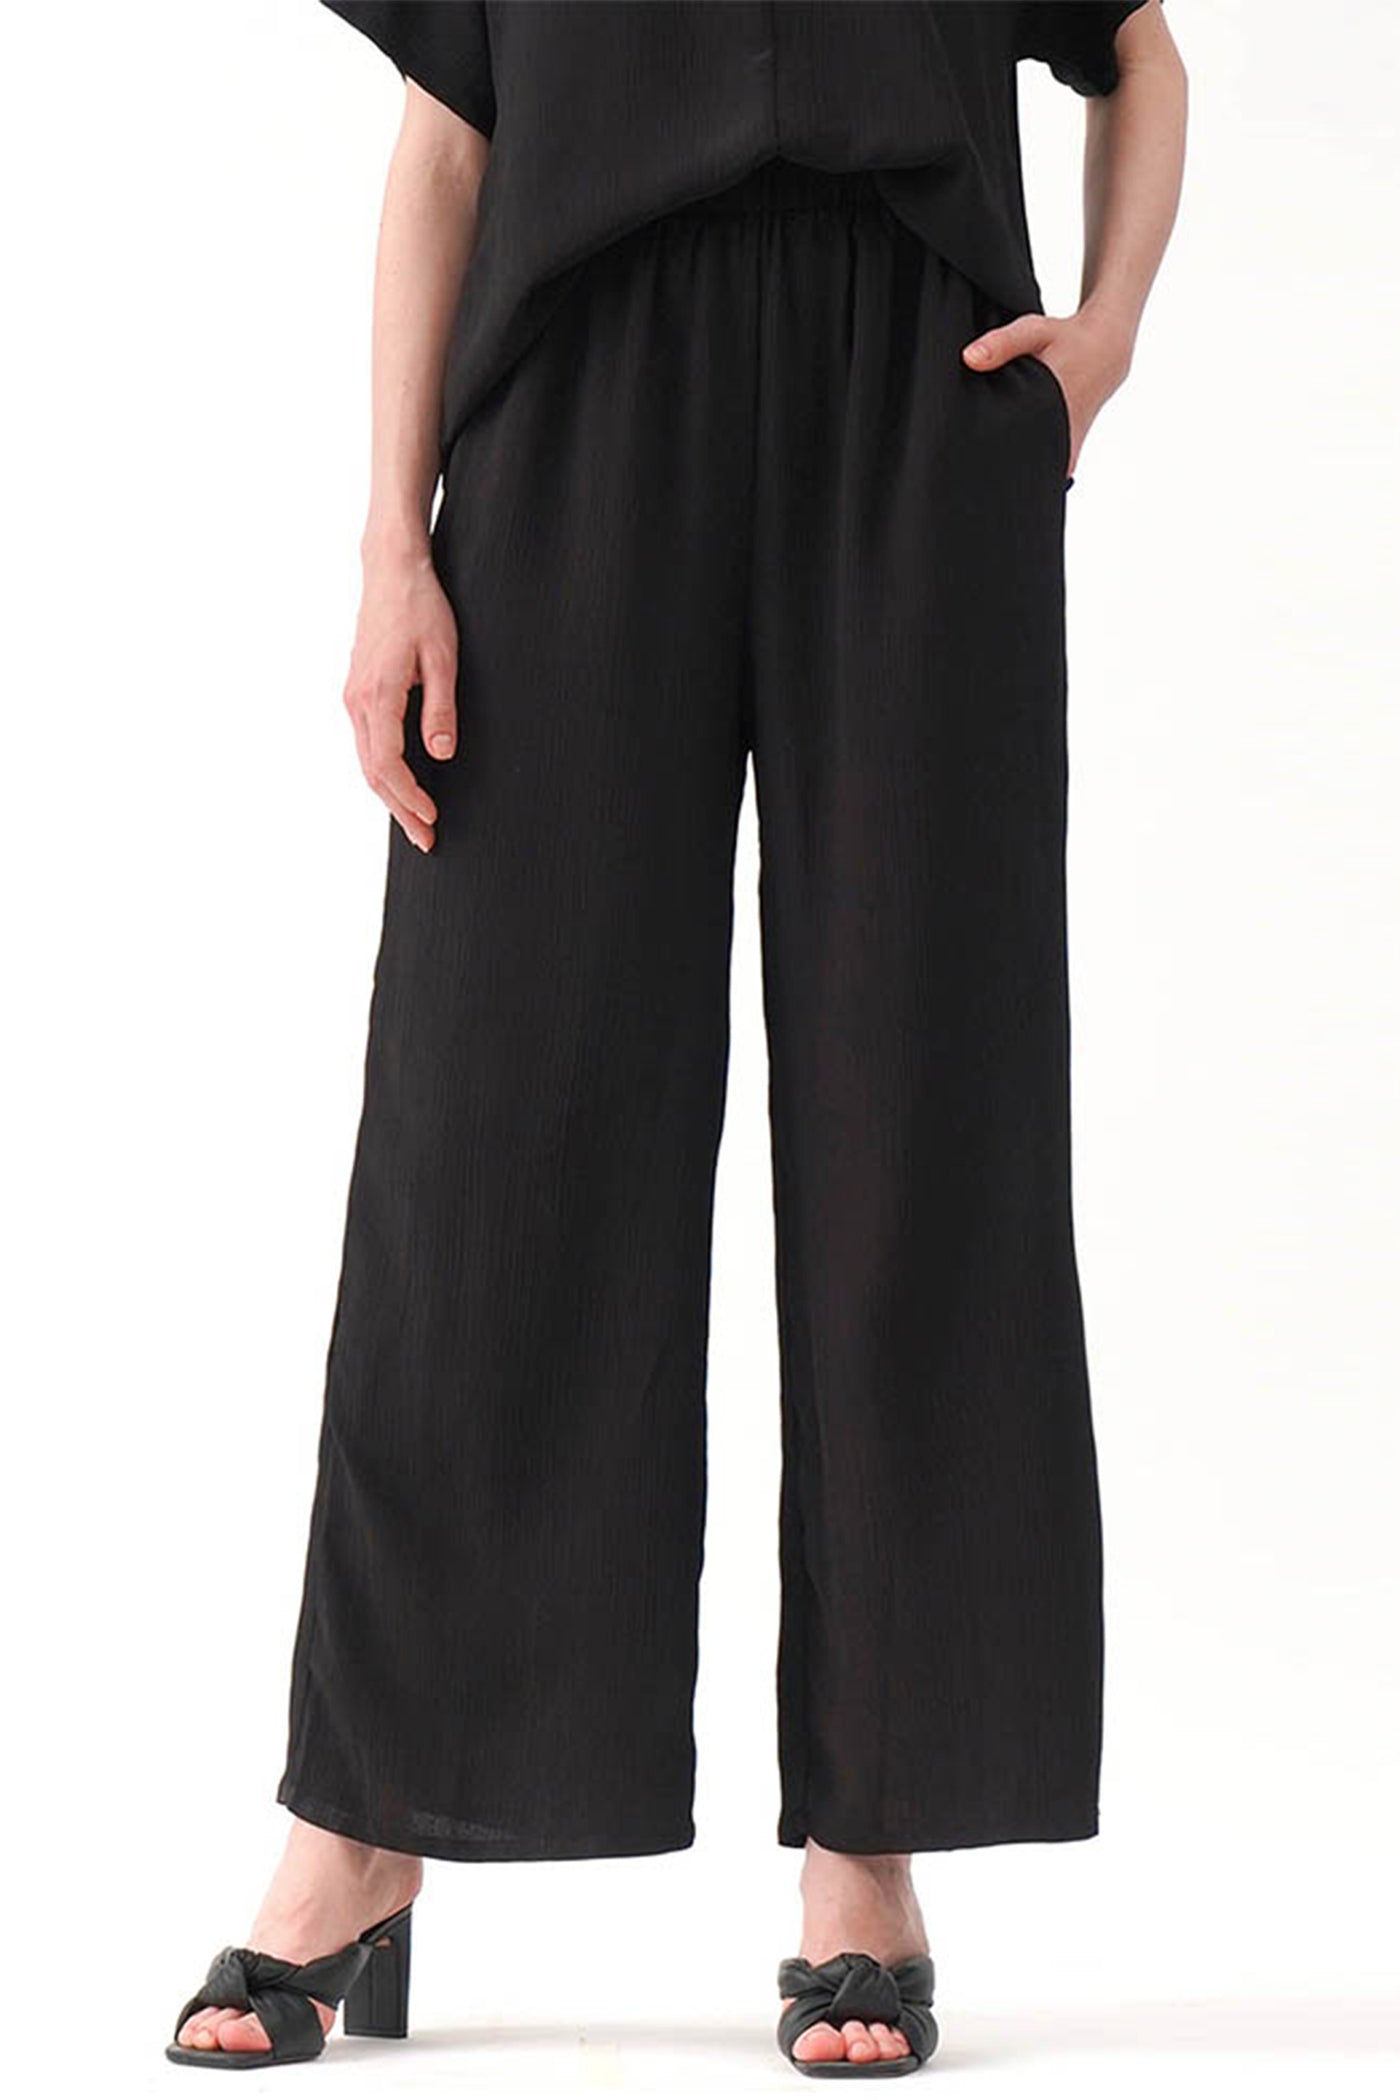 Women's Textured Split Neck Top and Pull On Trousers Set - The New Standard